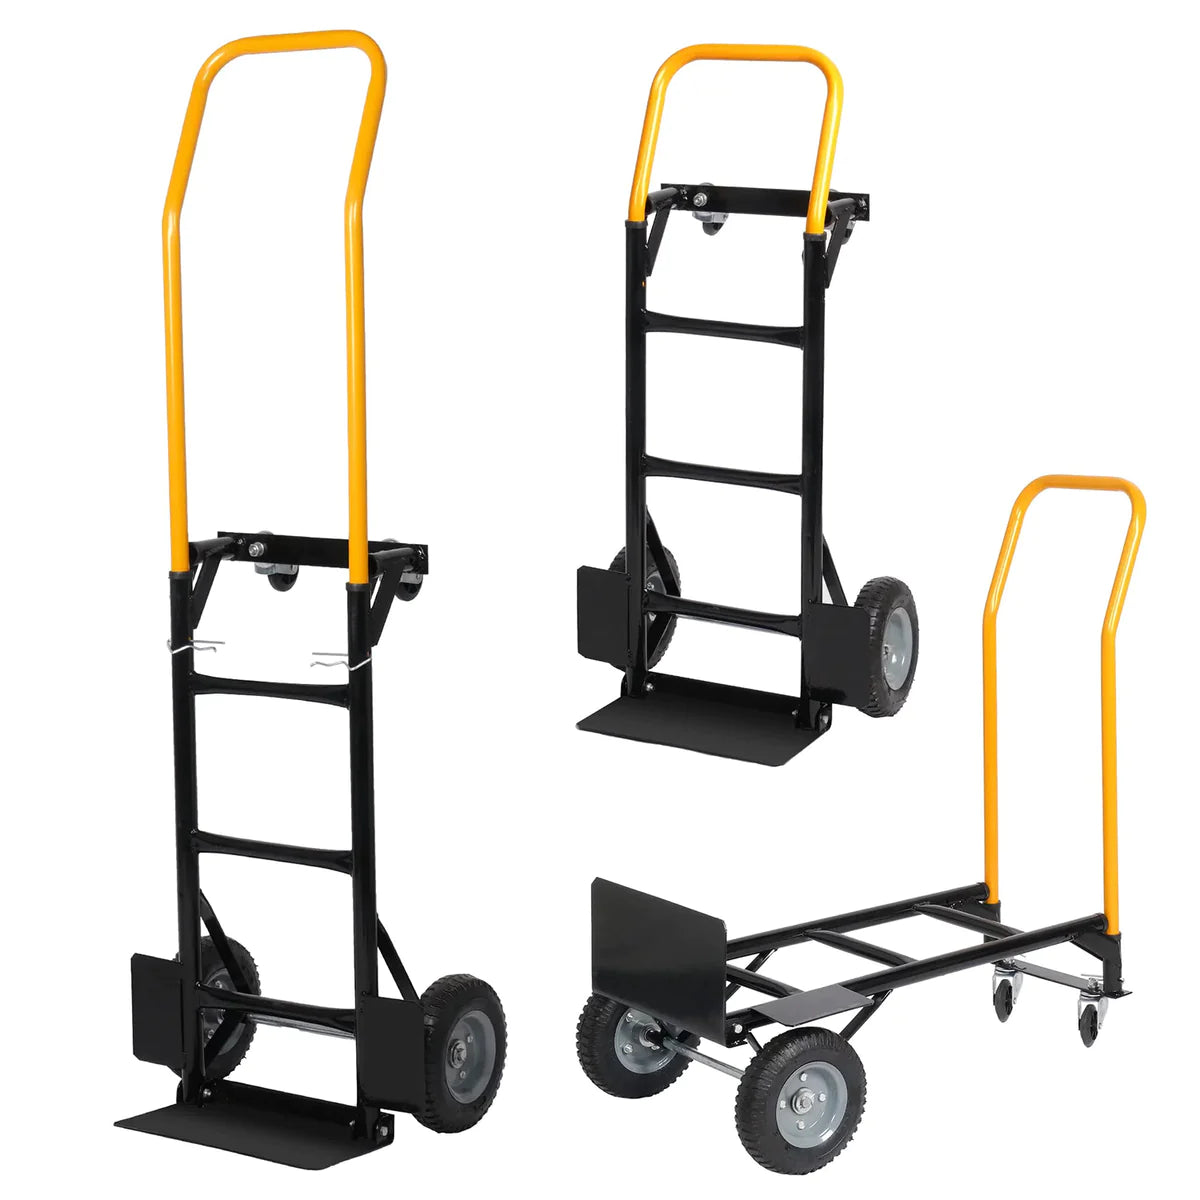 Four Wheels Multiple Modes Height Adjustable Portable Trolley, 330lbs Capacity